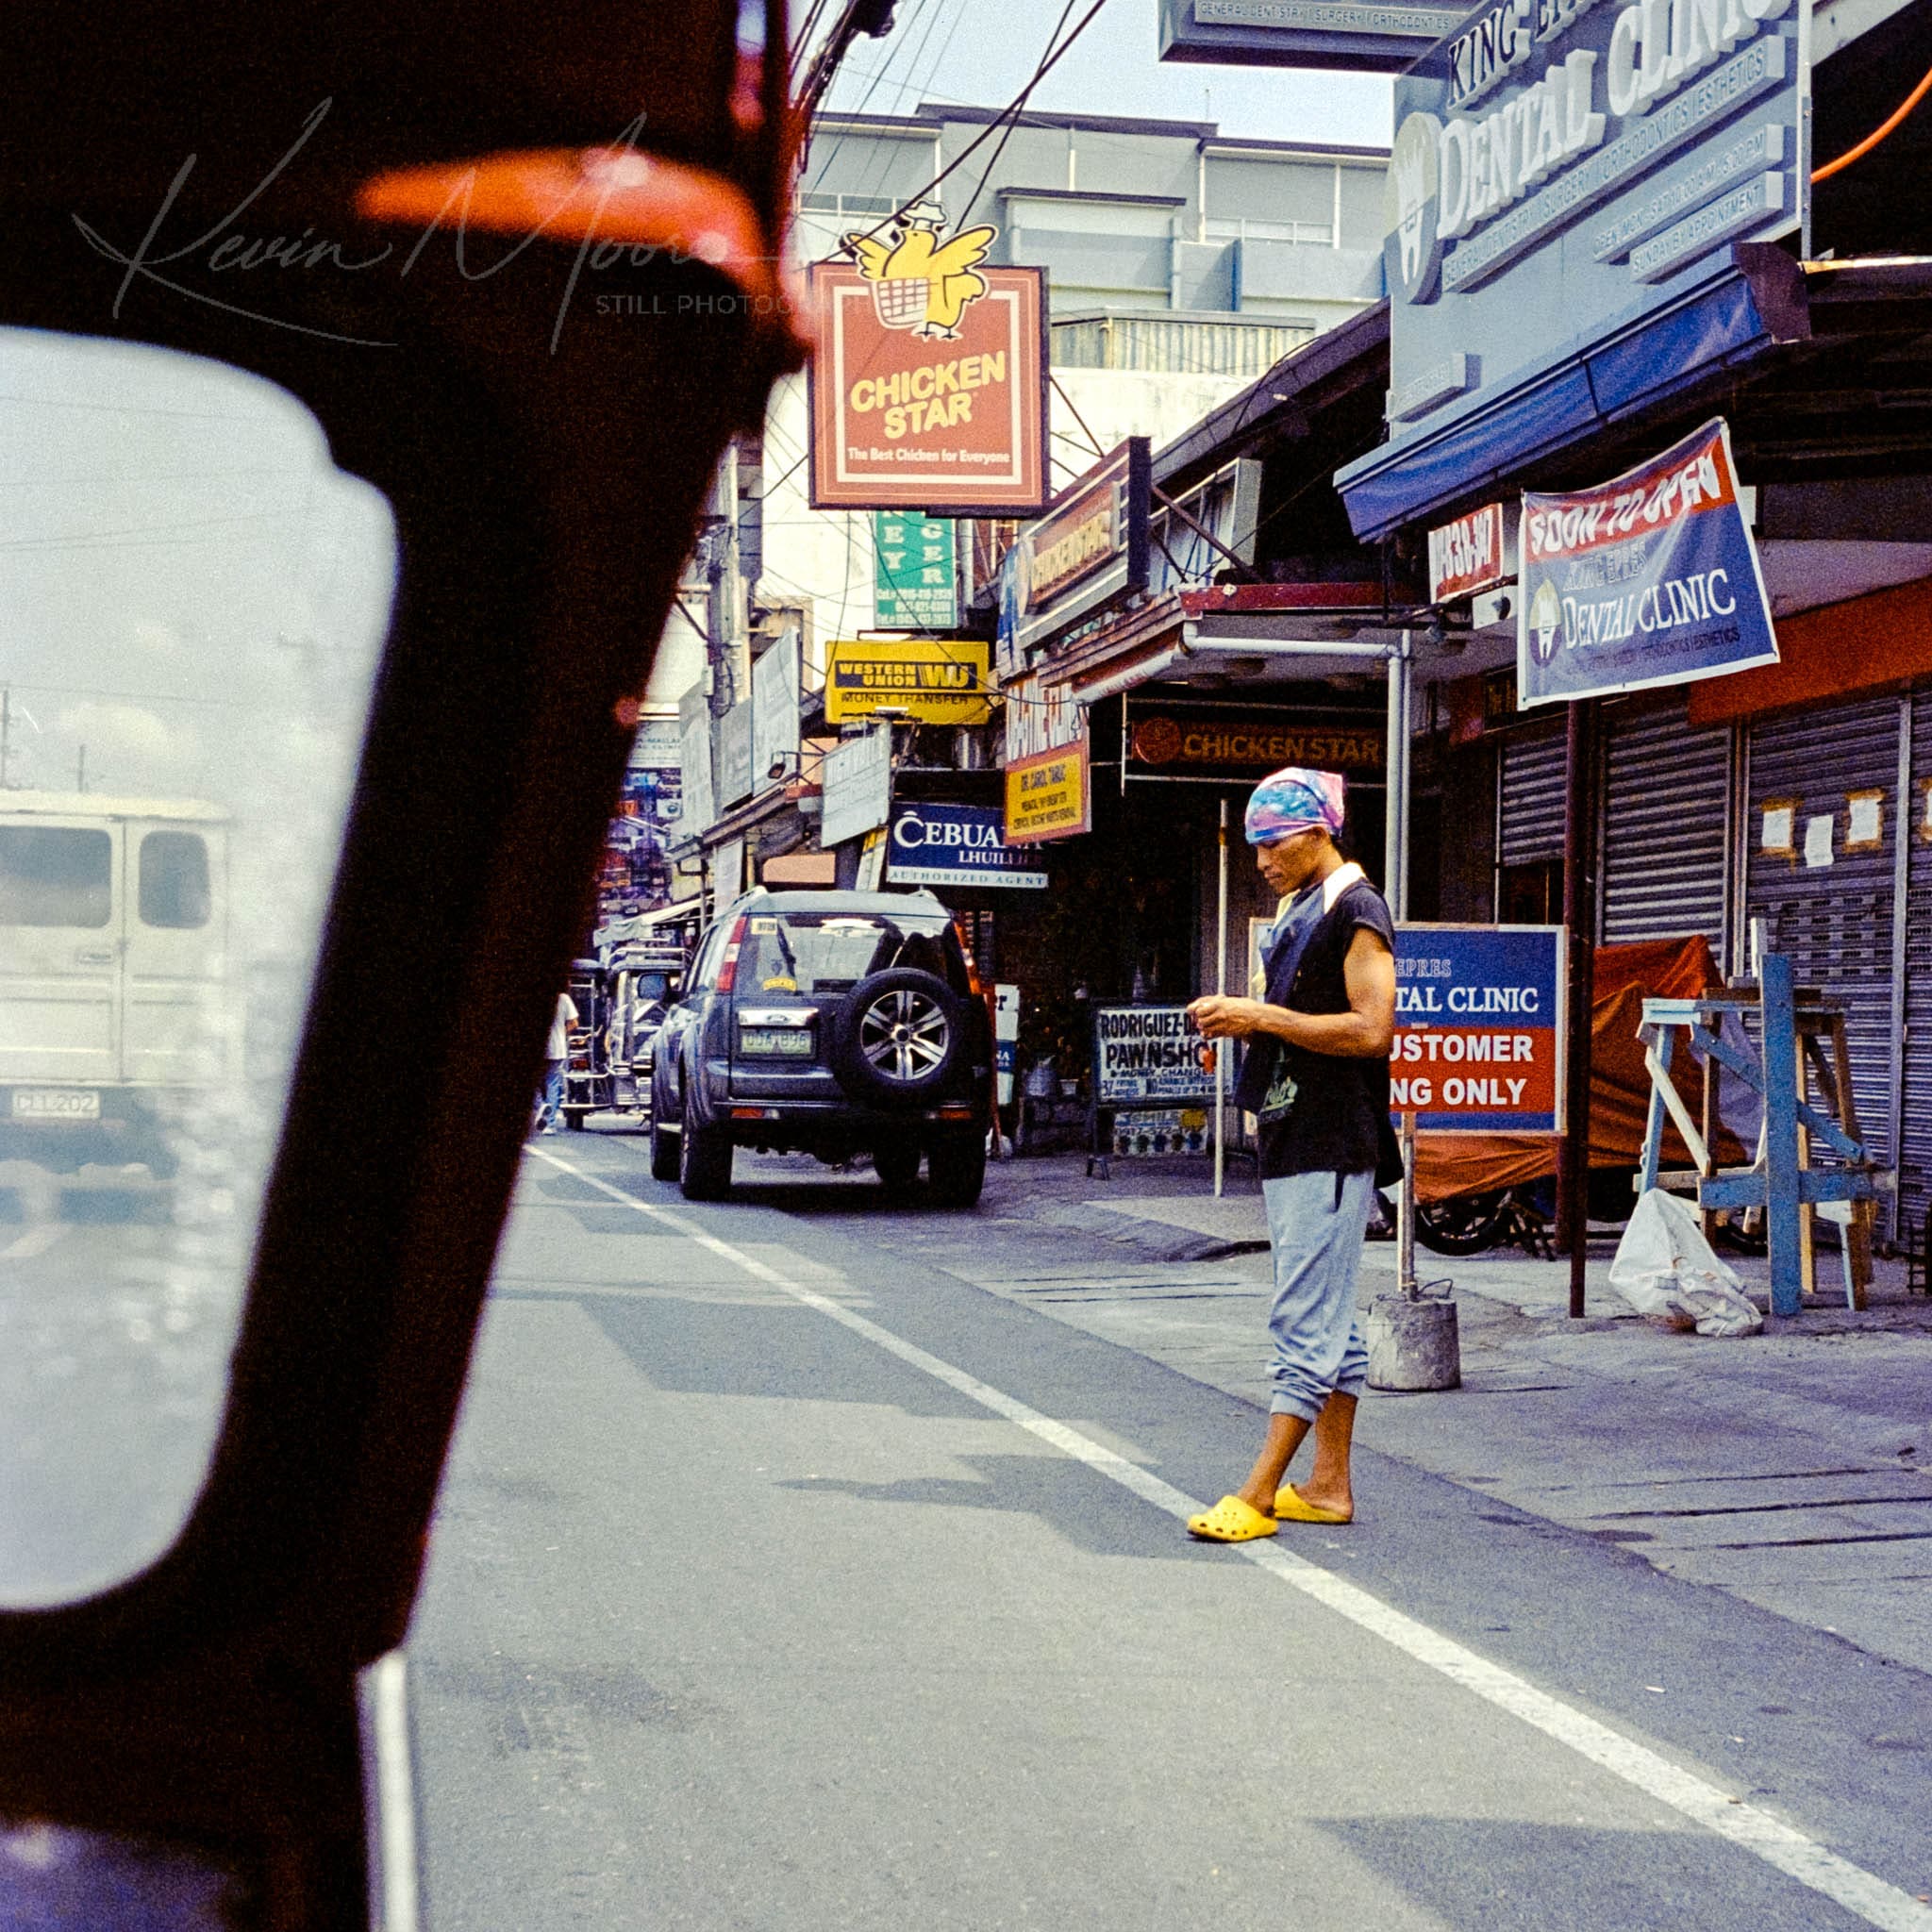 Person in mask using phone on a quiet urban street with English storefronts and parked vehicles.